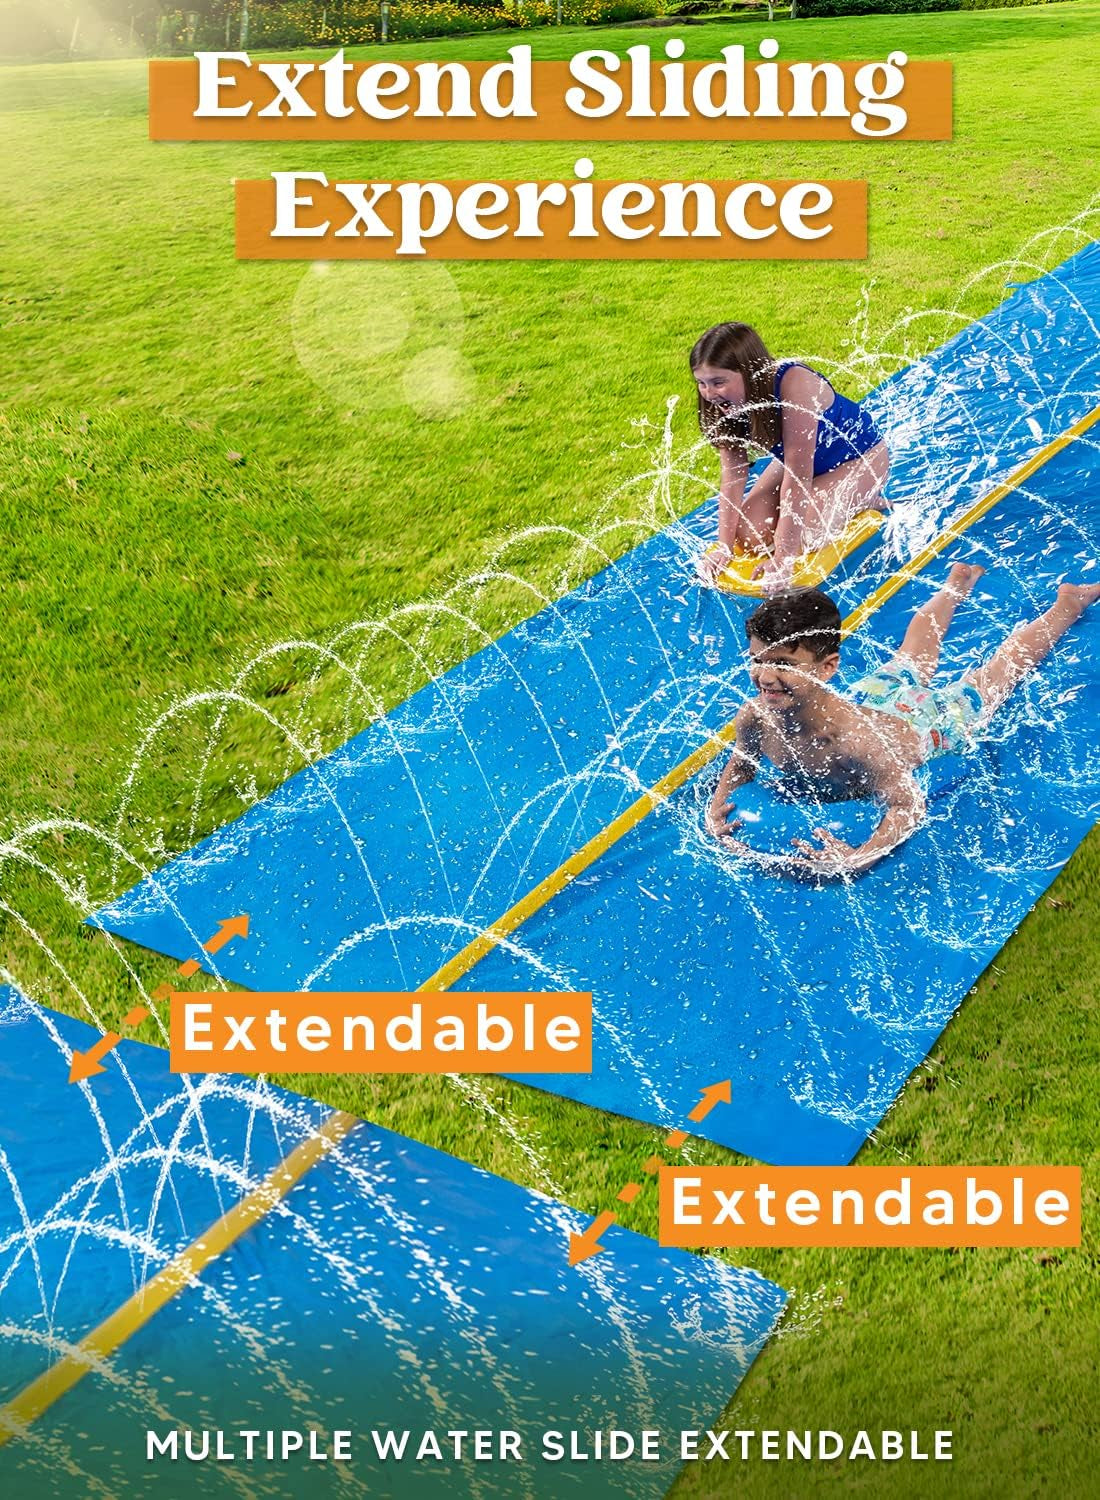 Huge Water Slide, 30Ft X 6Ft Heavy Duty Lawn Water Slide with Built-In Sprinkler and 2 Slip Inflatable Boards for Party in Summer Yard Lawn Outdoor Water Play Activities